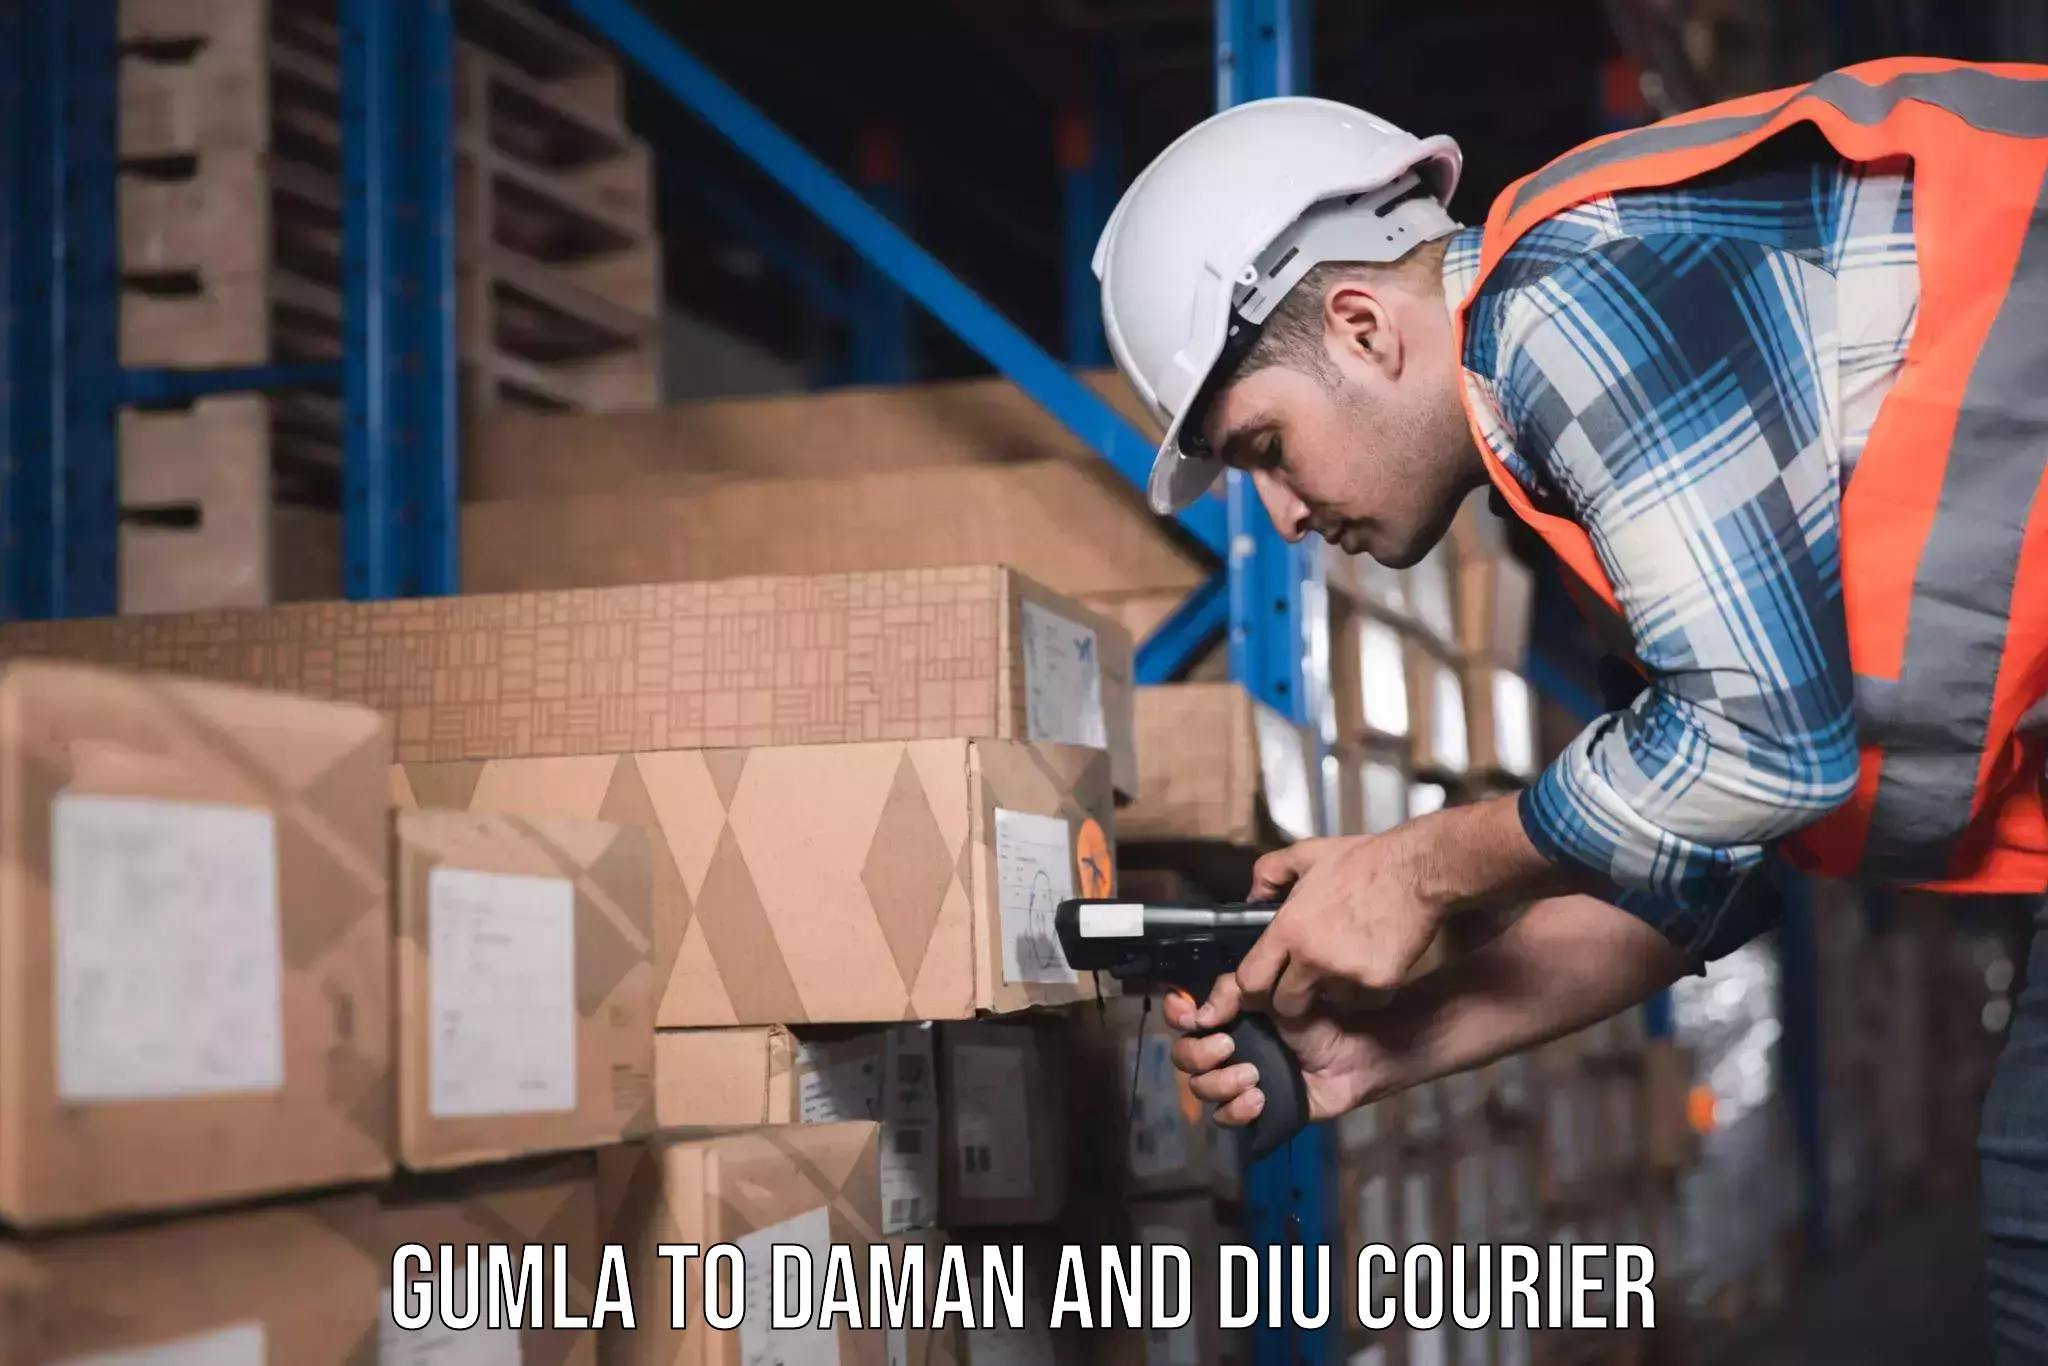 Furniture delivery service Gumla to Daman and Diu